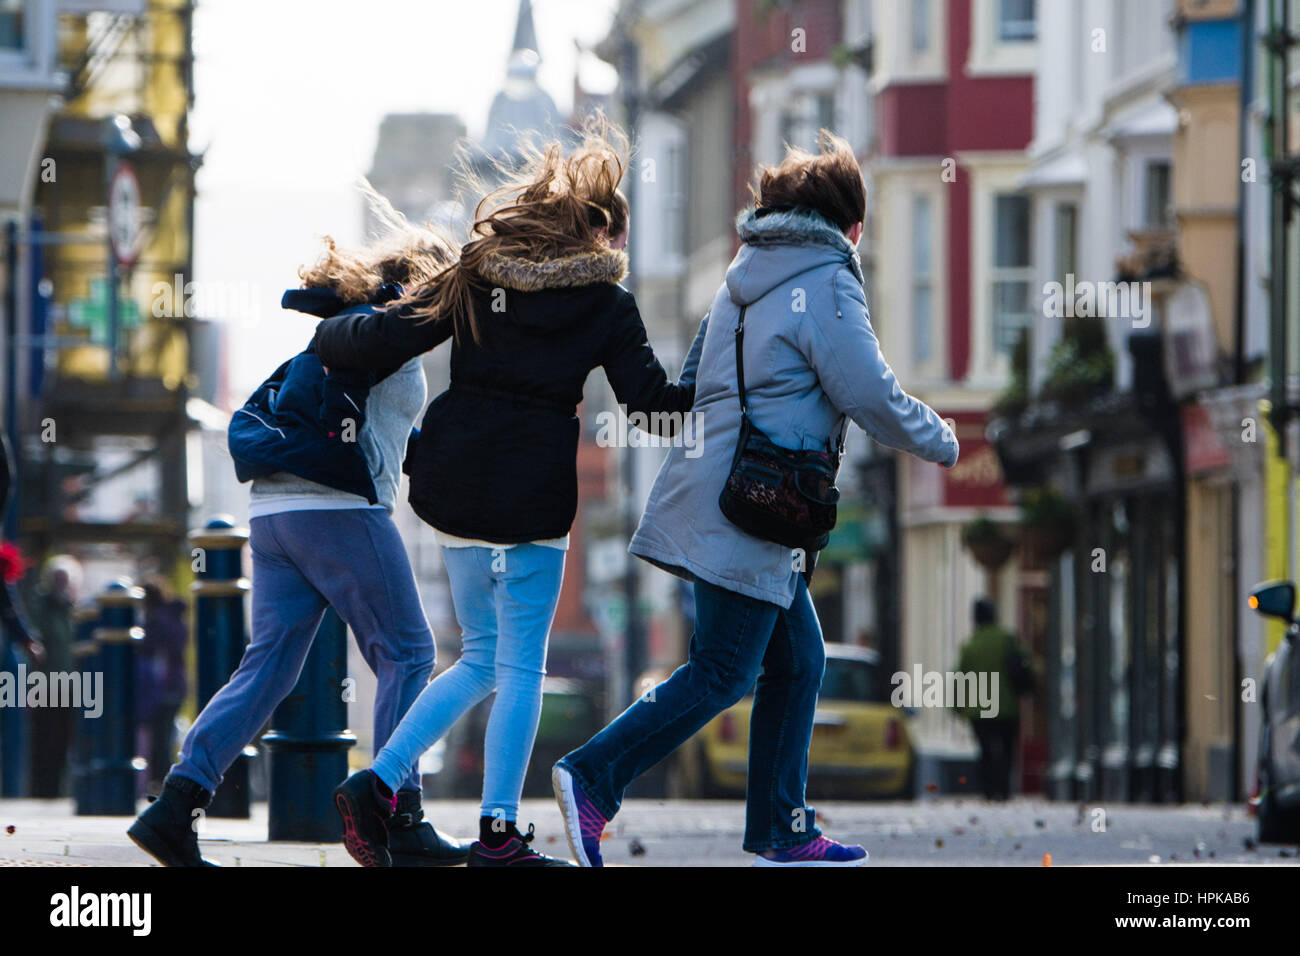 Aberystwyth, Wales, UK. 23rd Feb, 2017. UK Weather: As the winds from Storm Doris strengthen, pedestrians struggle to walk on the streets of Aberystwyth this morning. Violent Storm Force 11 winds, with gusts of up to 90mph are forecast for parts of North Wales and NorthWest England, with the risk of damage to property and severe disruption to travel Storm Doris is the fourth named storm of the winter, and has been classified as a ‘weather bomb' (explosive cyclogenesis) by the Met Office Photo Credit: Keith Morris /Alamy Live News Stock Photo